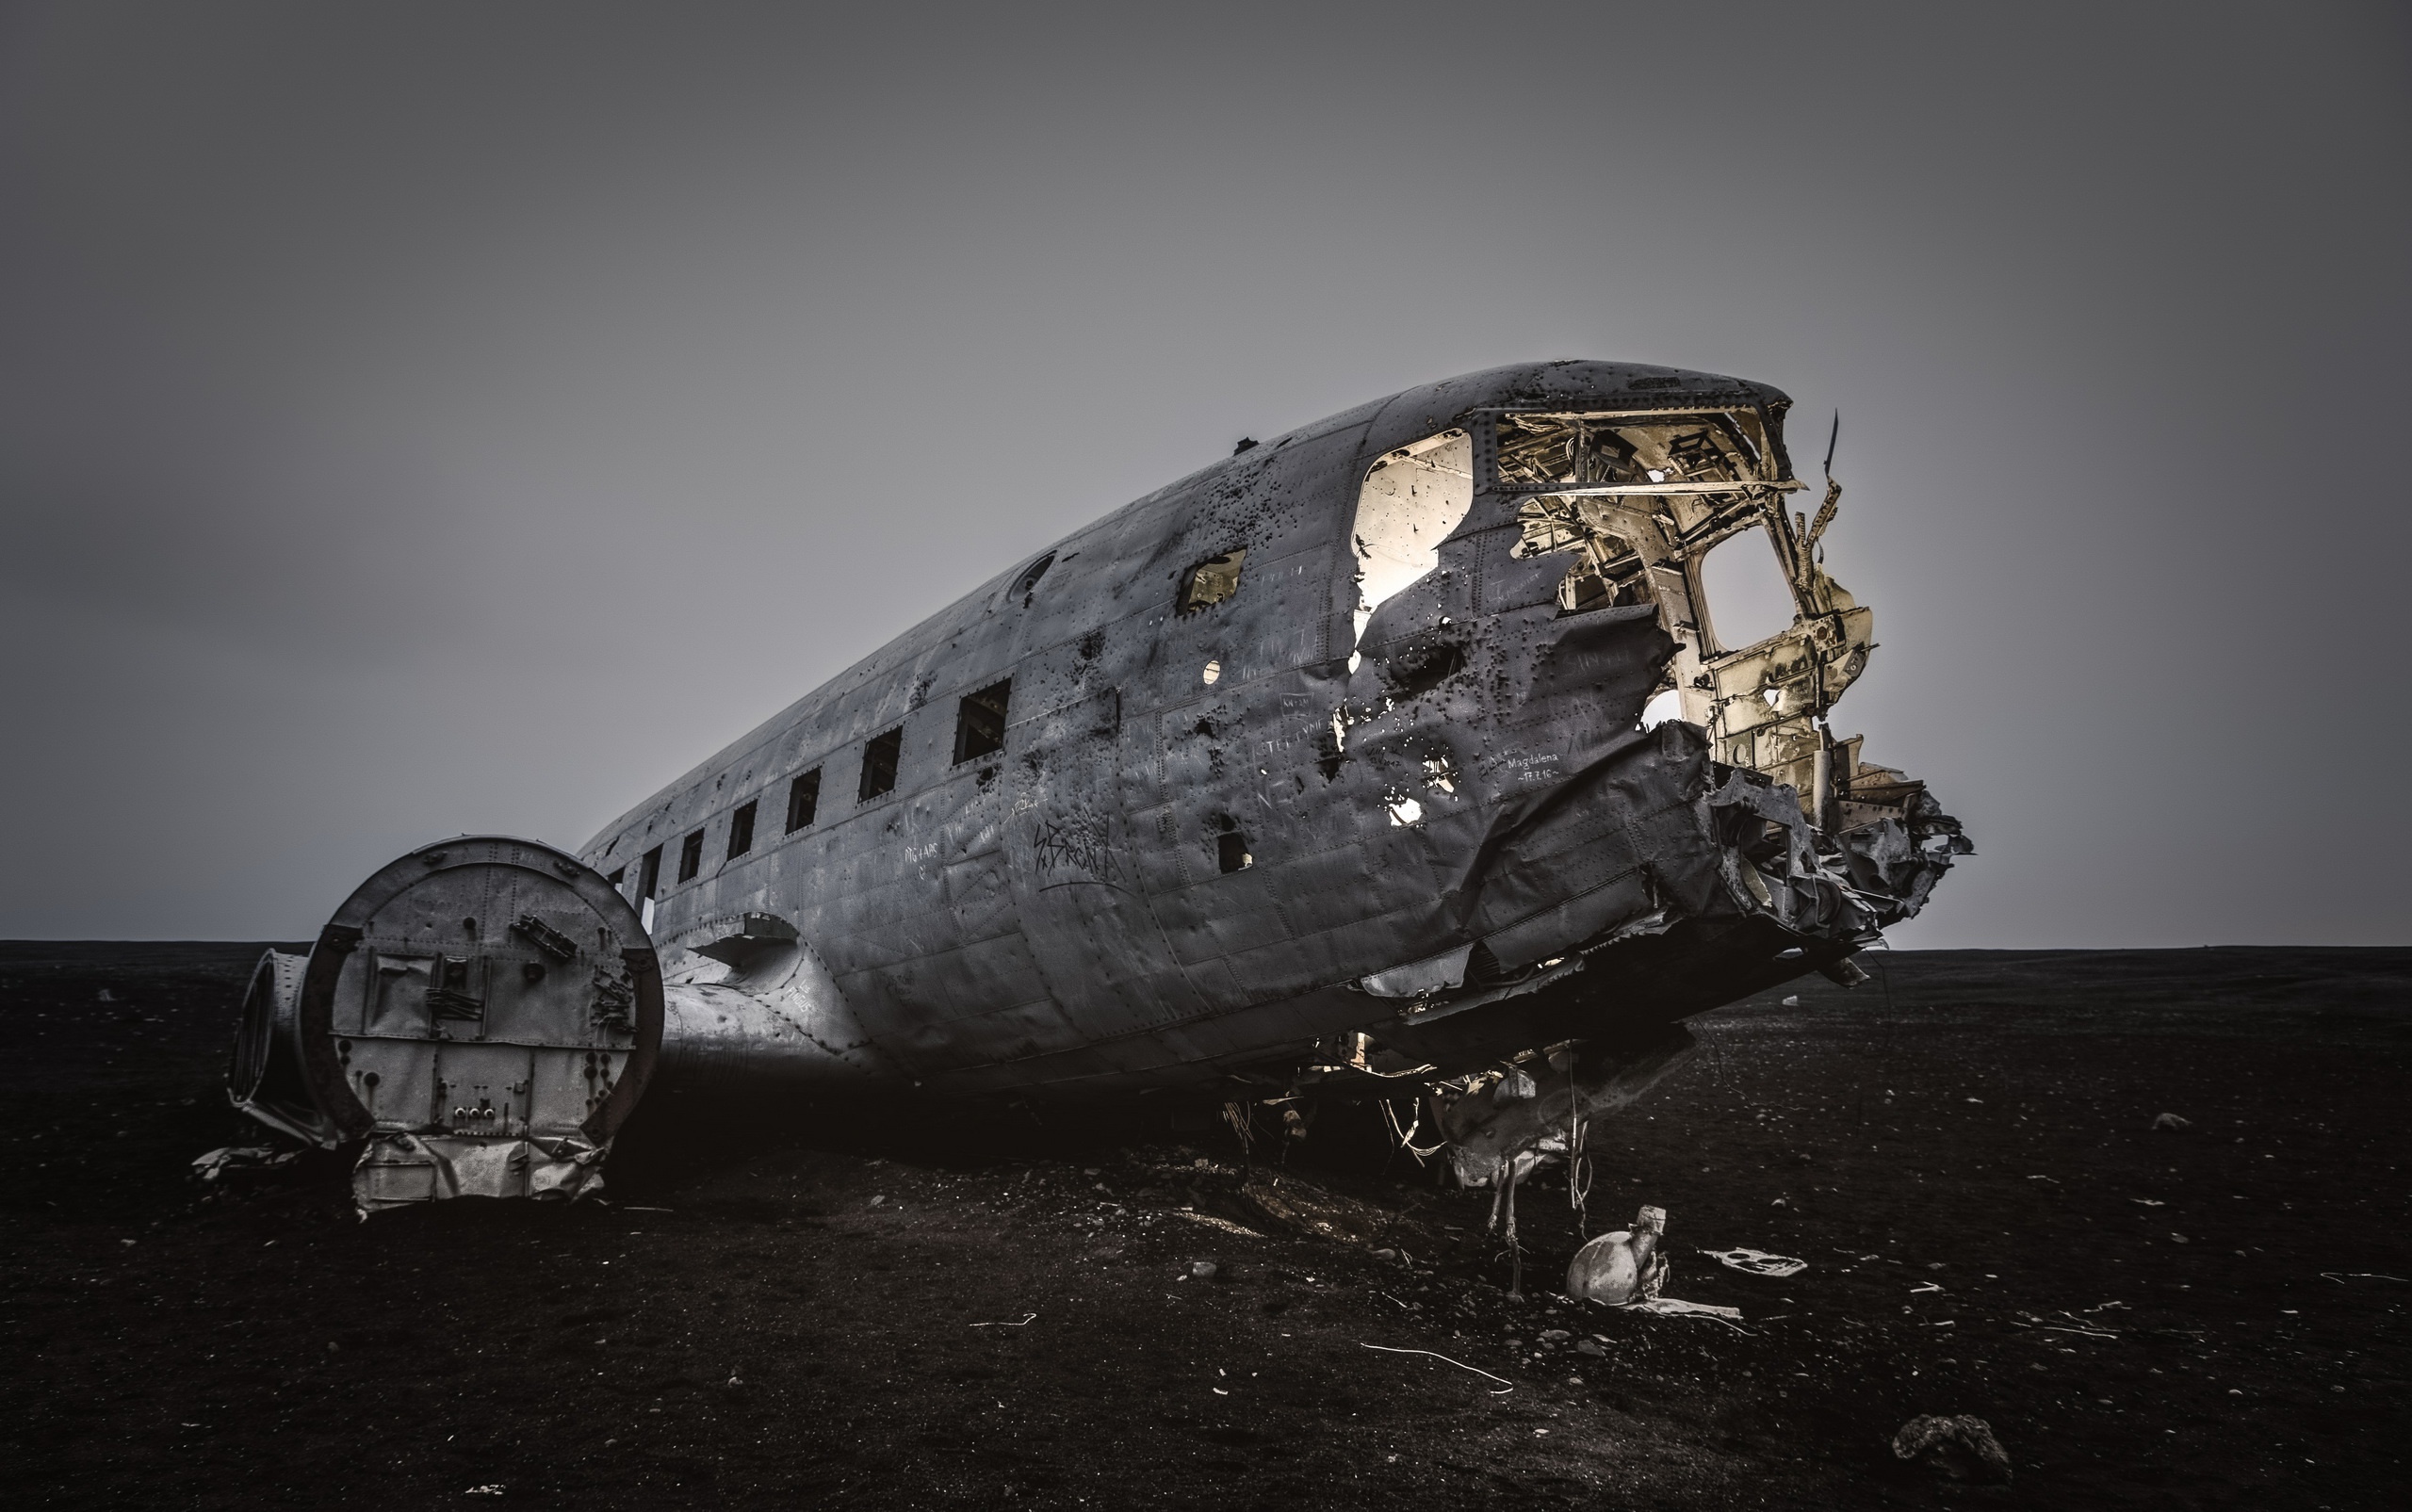 Aircraft Old Wreck Vehicle Black Sand Iceland Gray Overcast Abandoned 2560x1605